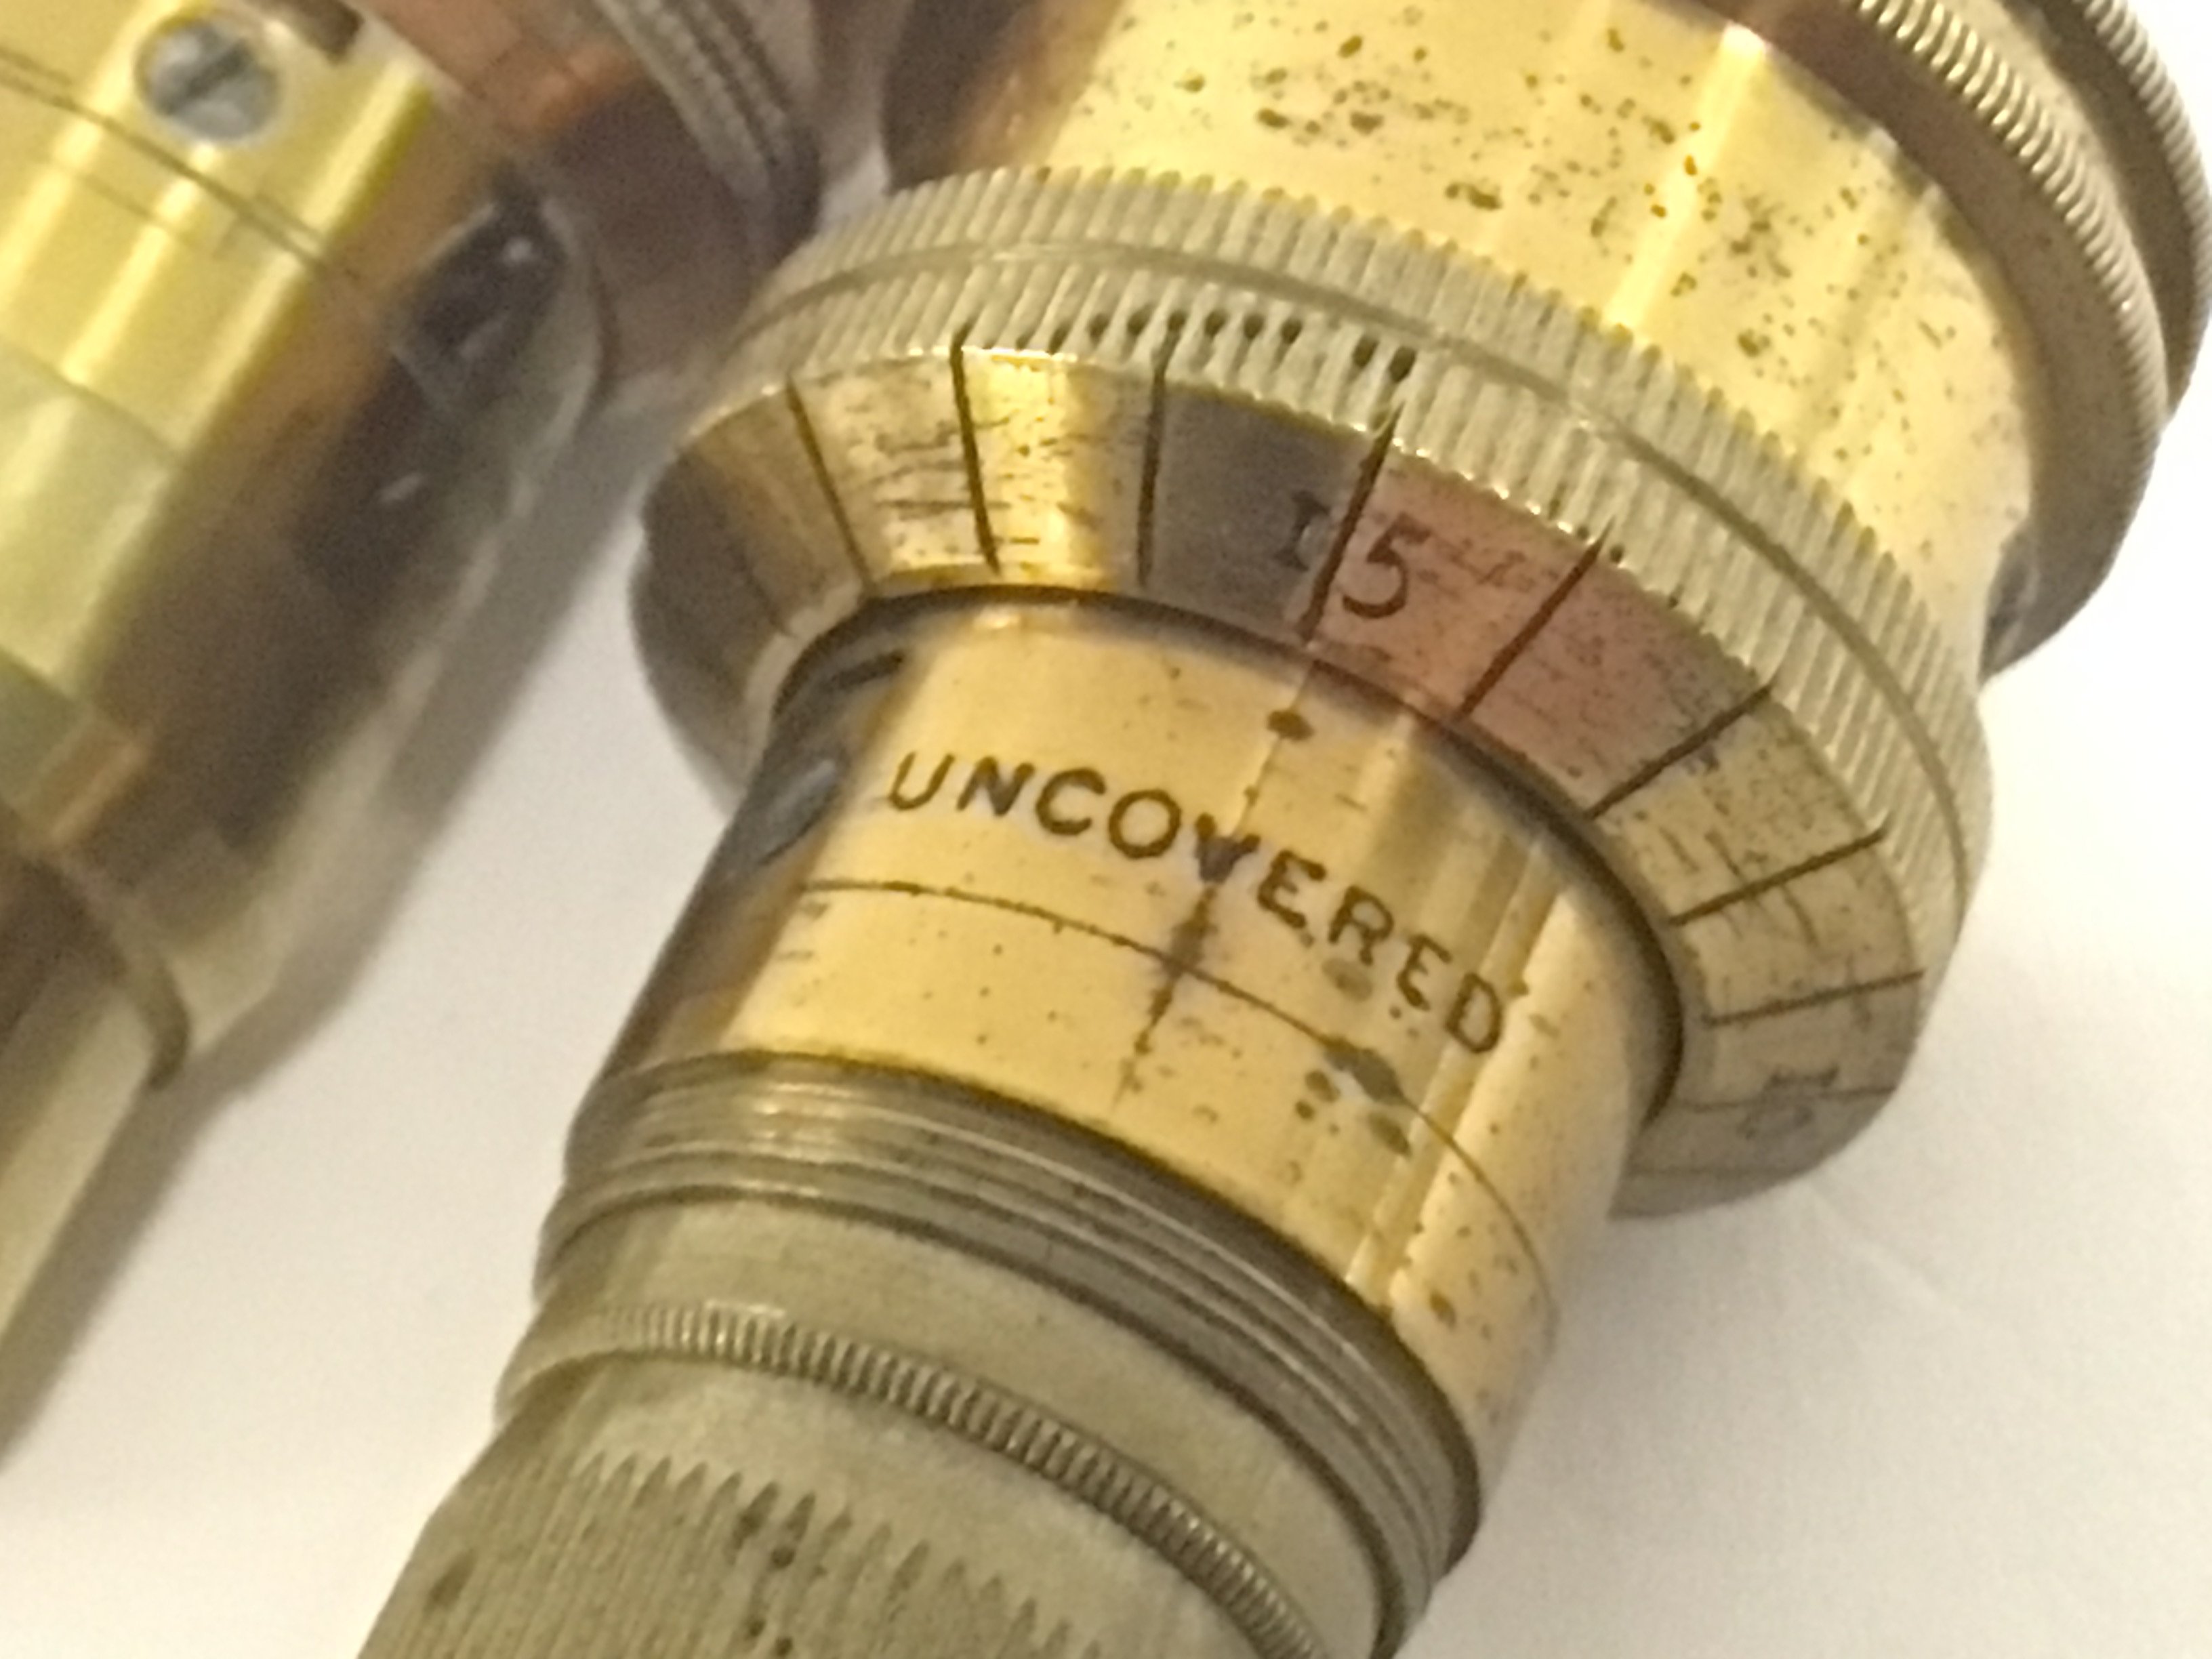 Two cased brass 1/2 inch microscope lenses by J.B - Image 5 of 7